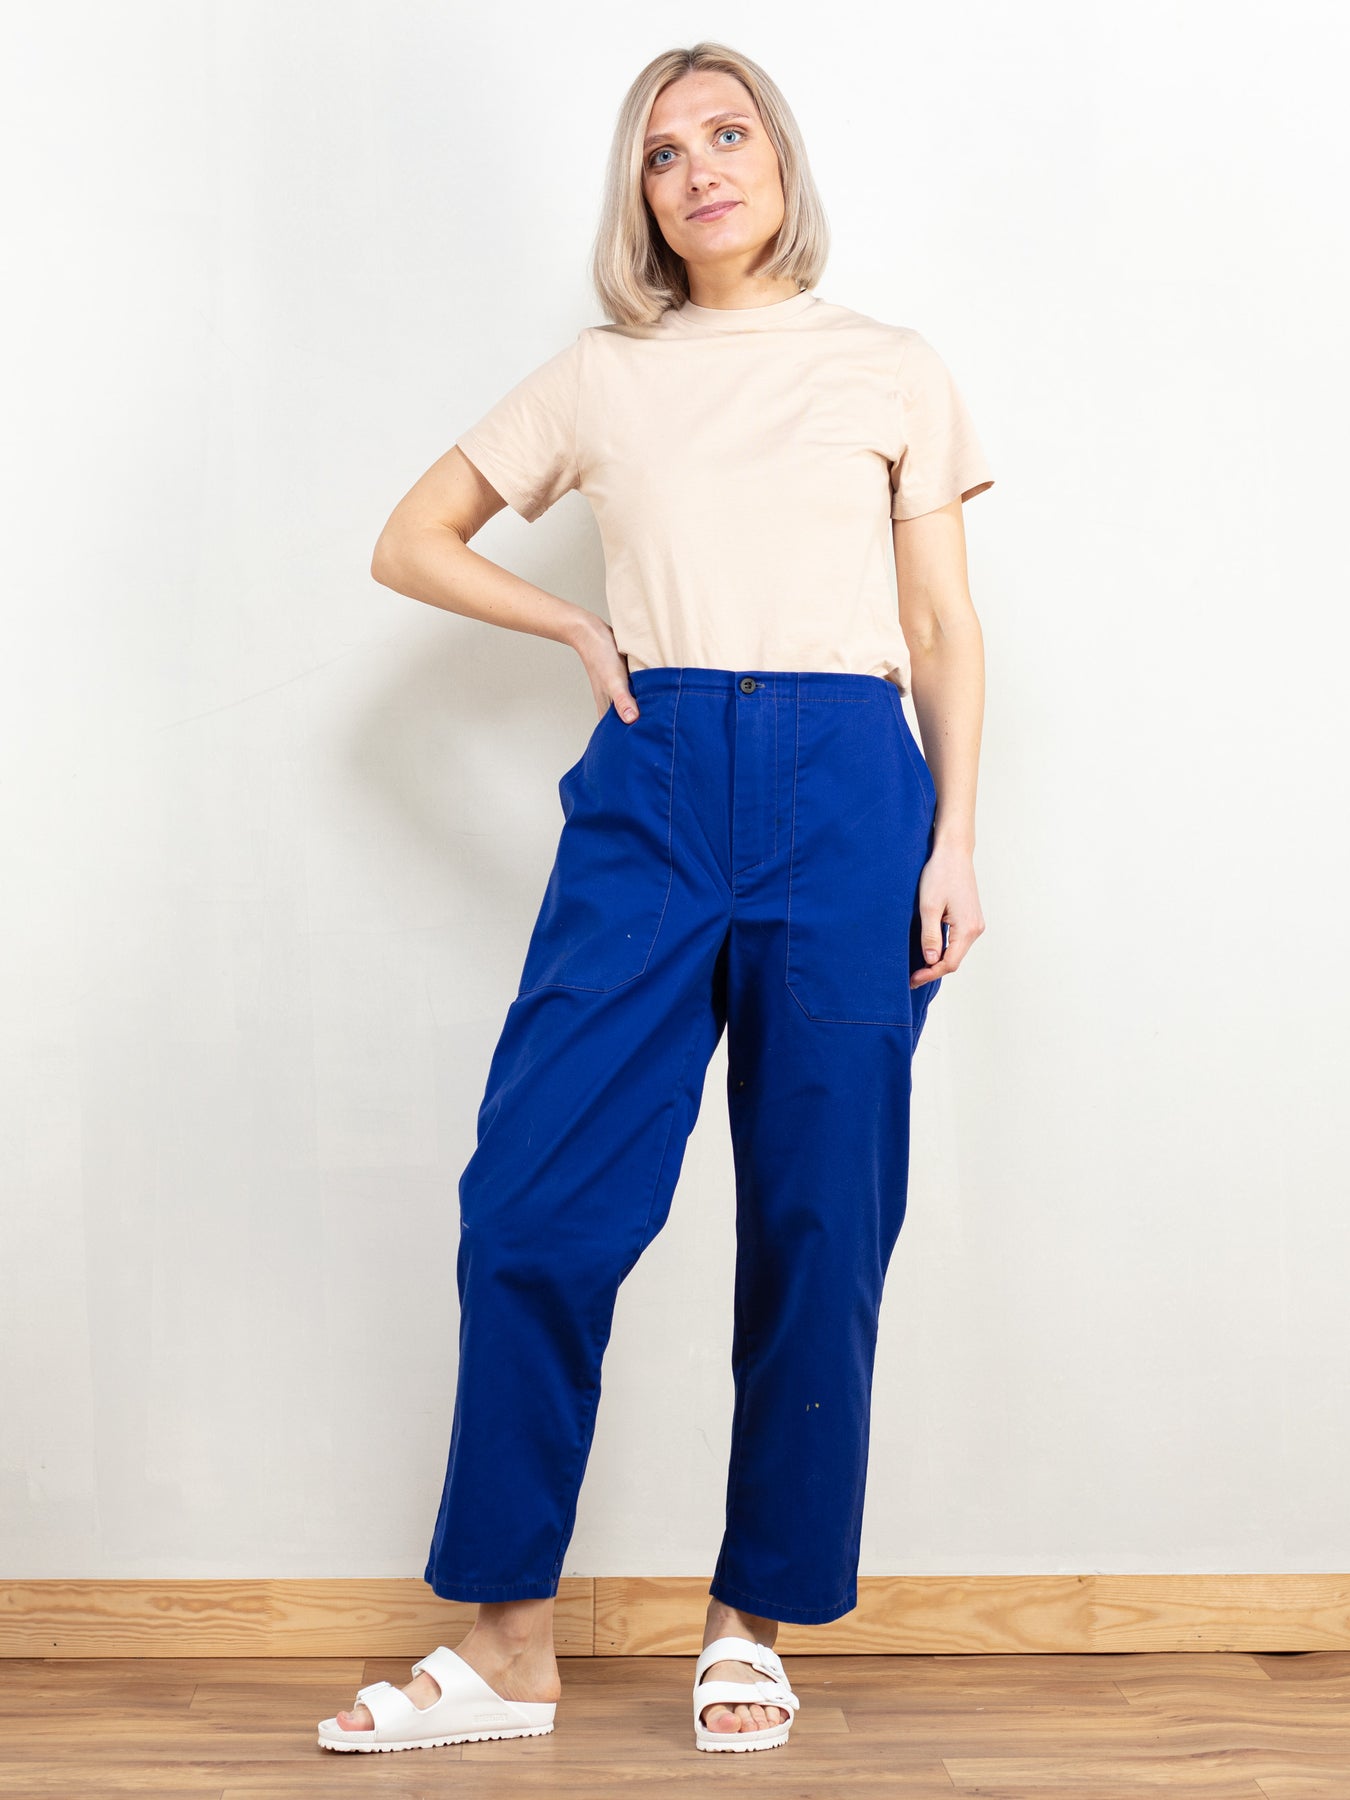 parachute pants 90s | Geagodelia Wide Leg Cargos Parachute Pants Baggy High  Waist Y2K Straight Fit Cargo Trousers Women 90s Fashion Aesthetic Casual  Jogger Trousers with Drawstring